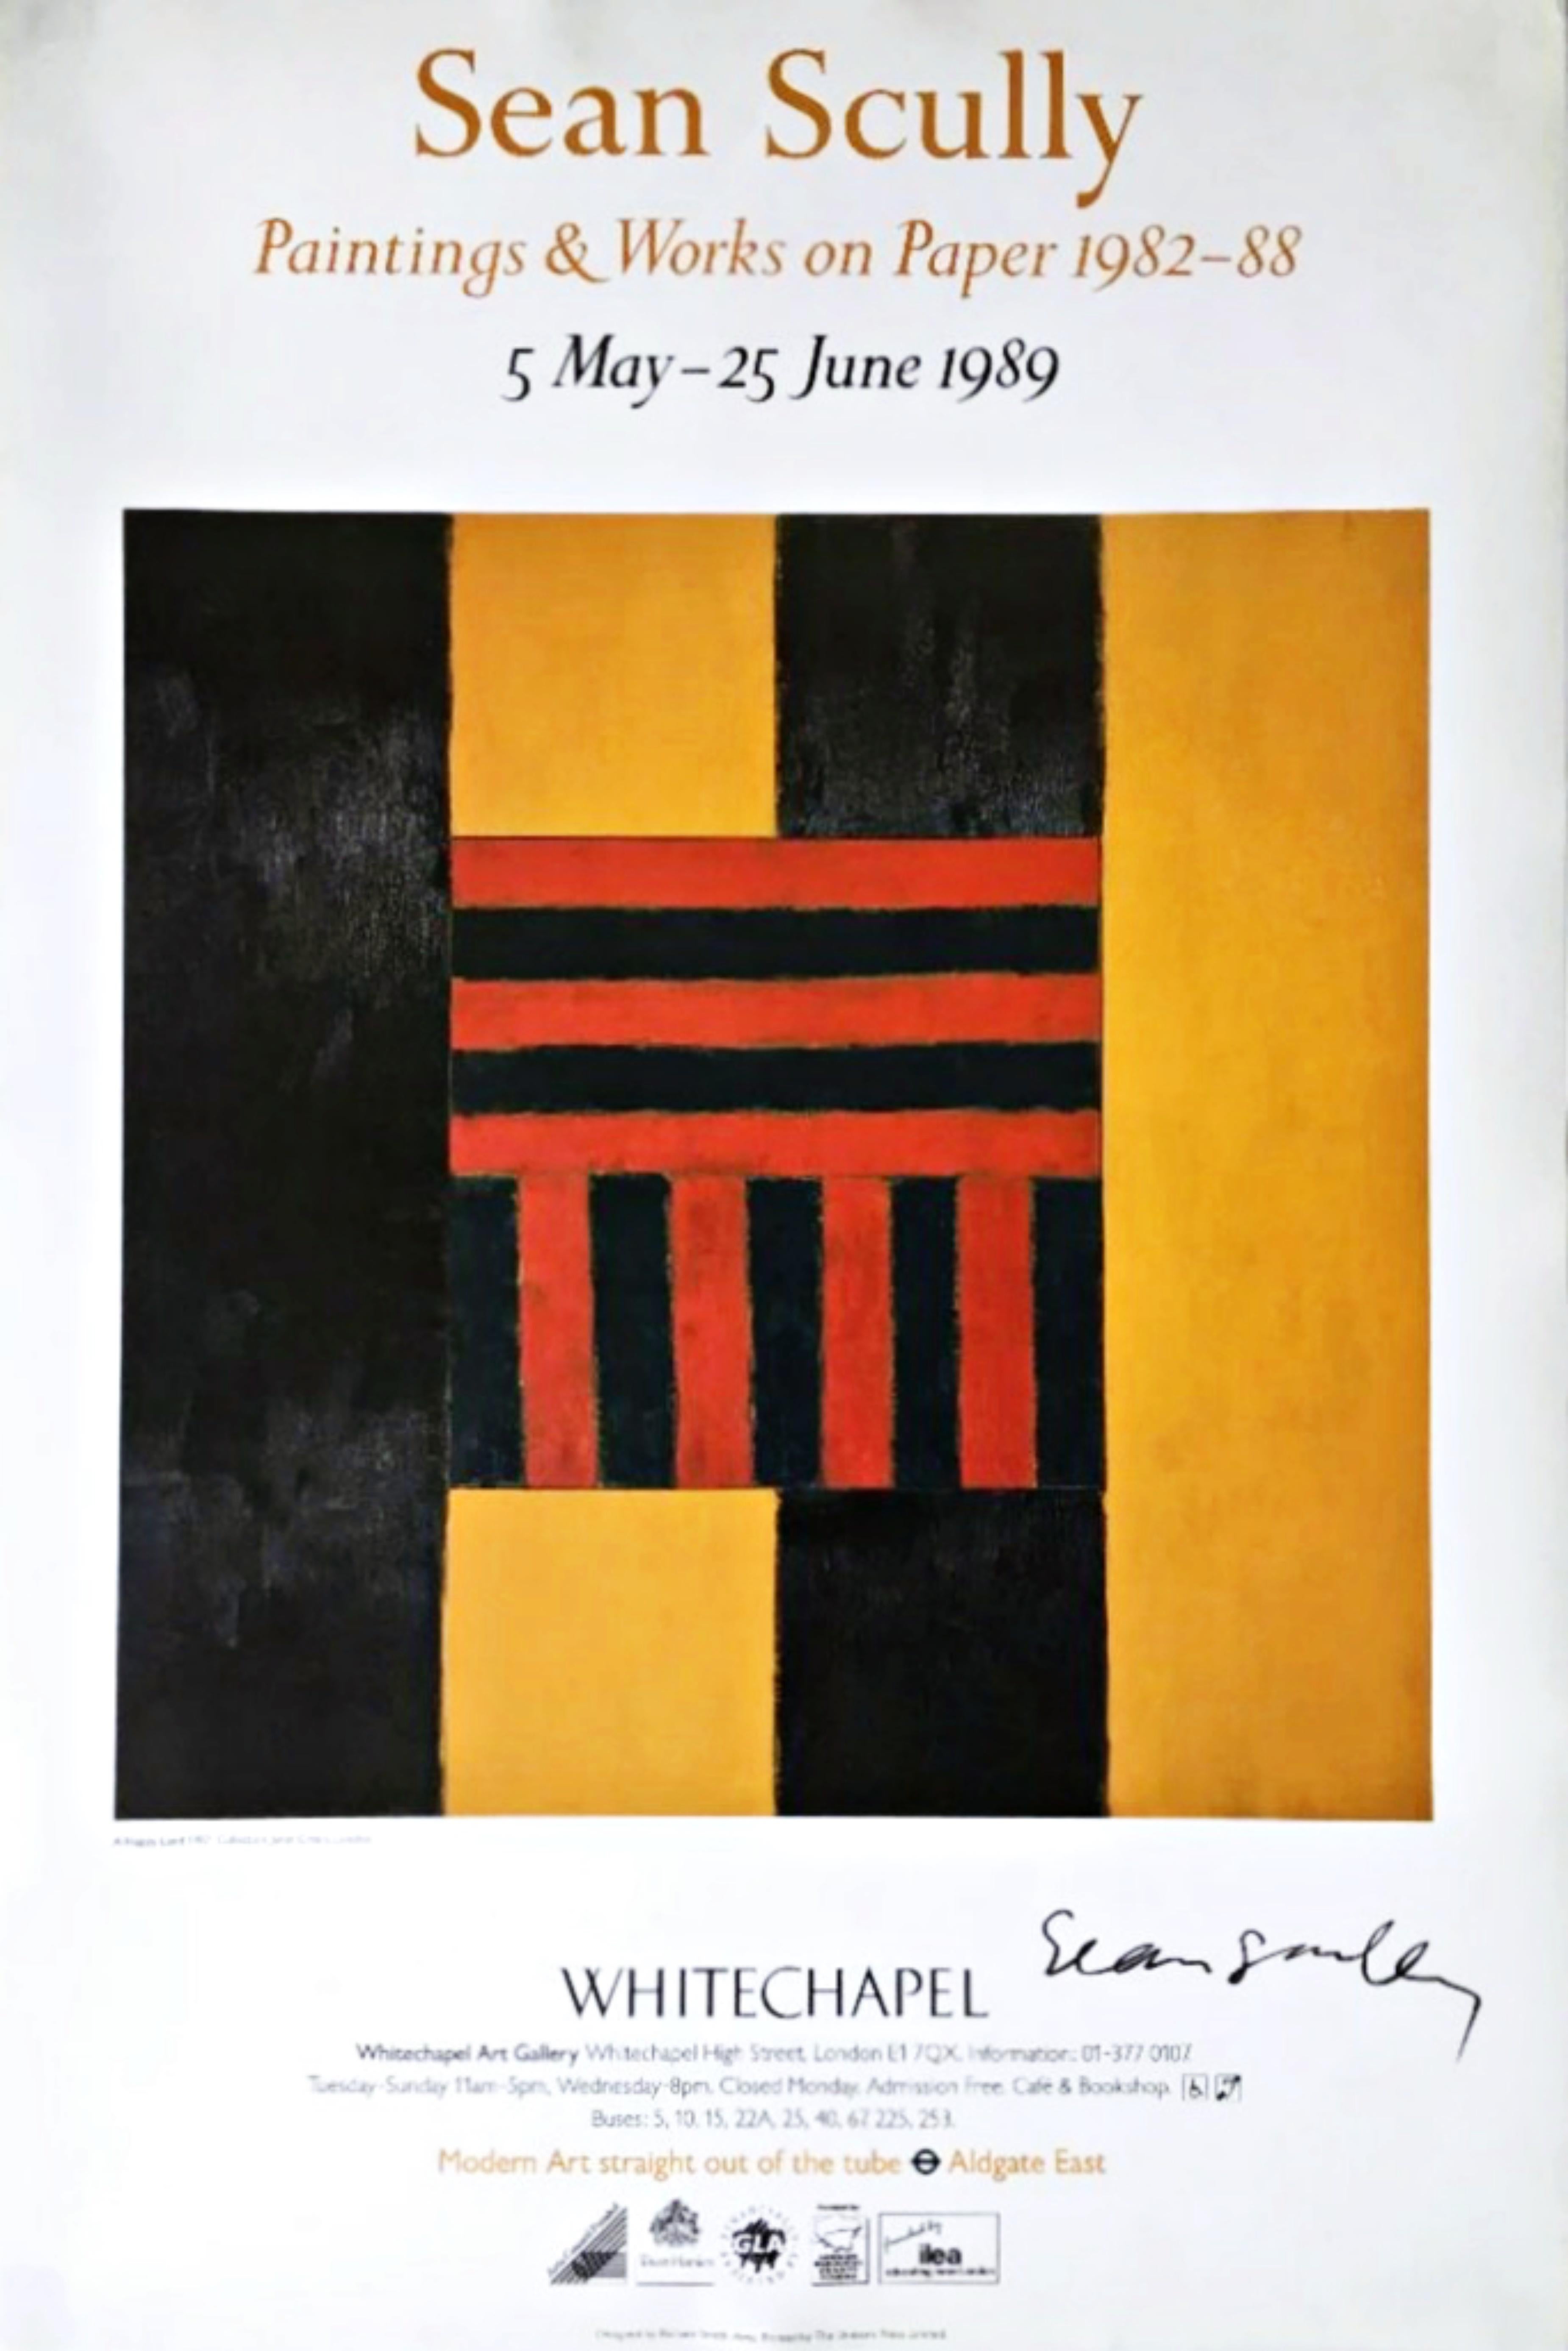 Abstract Print Sean Scully - Affiche d'exposition Painting & Works on Paper, Whitechapel Gallery (signée à la main) 